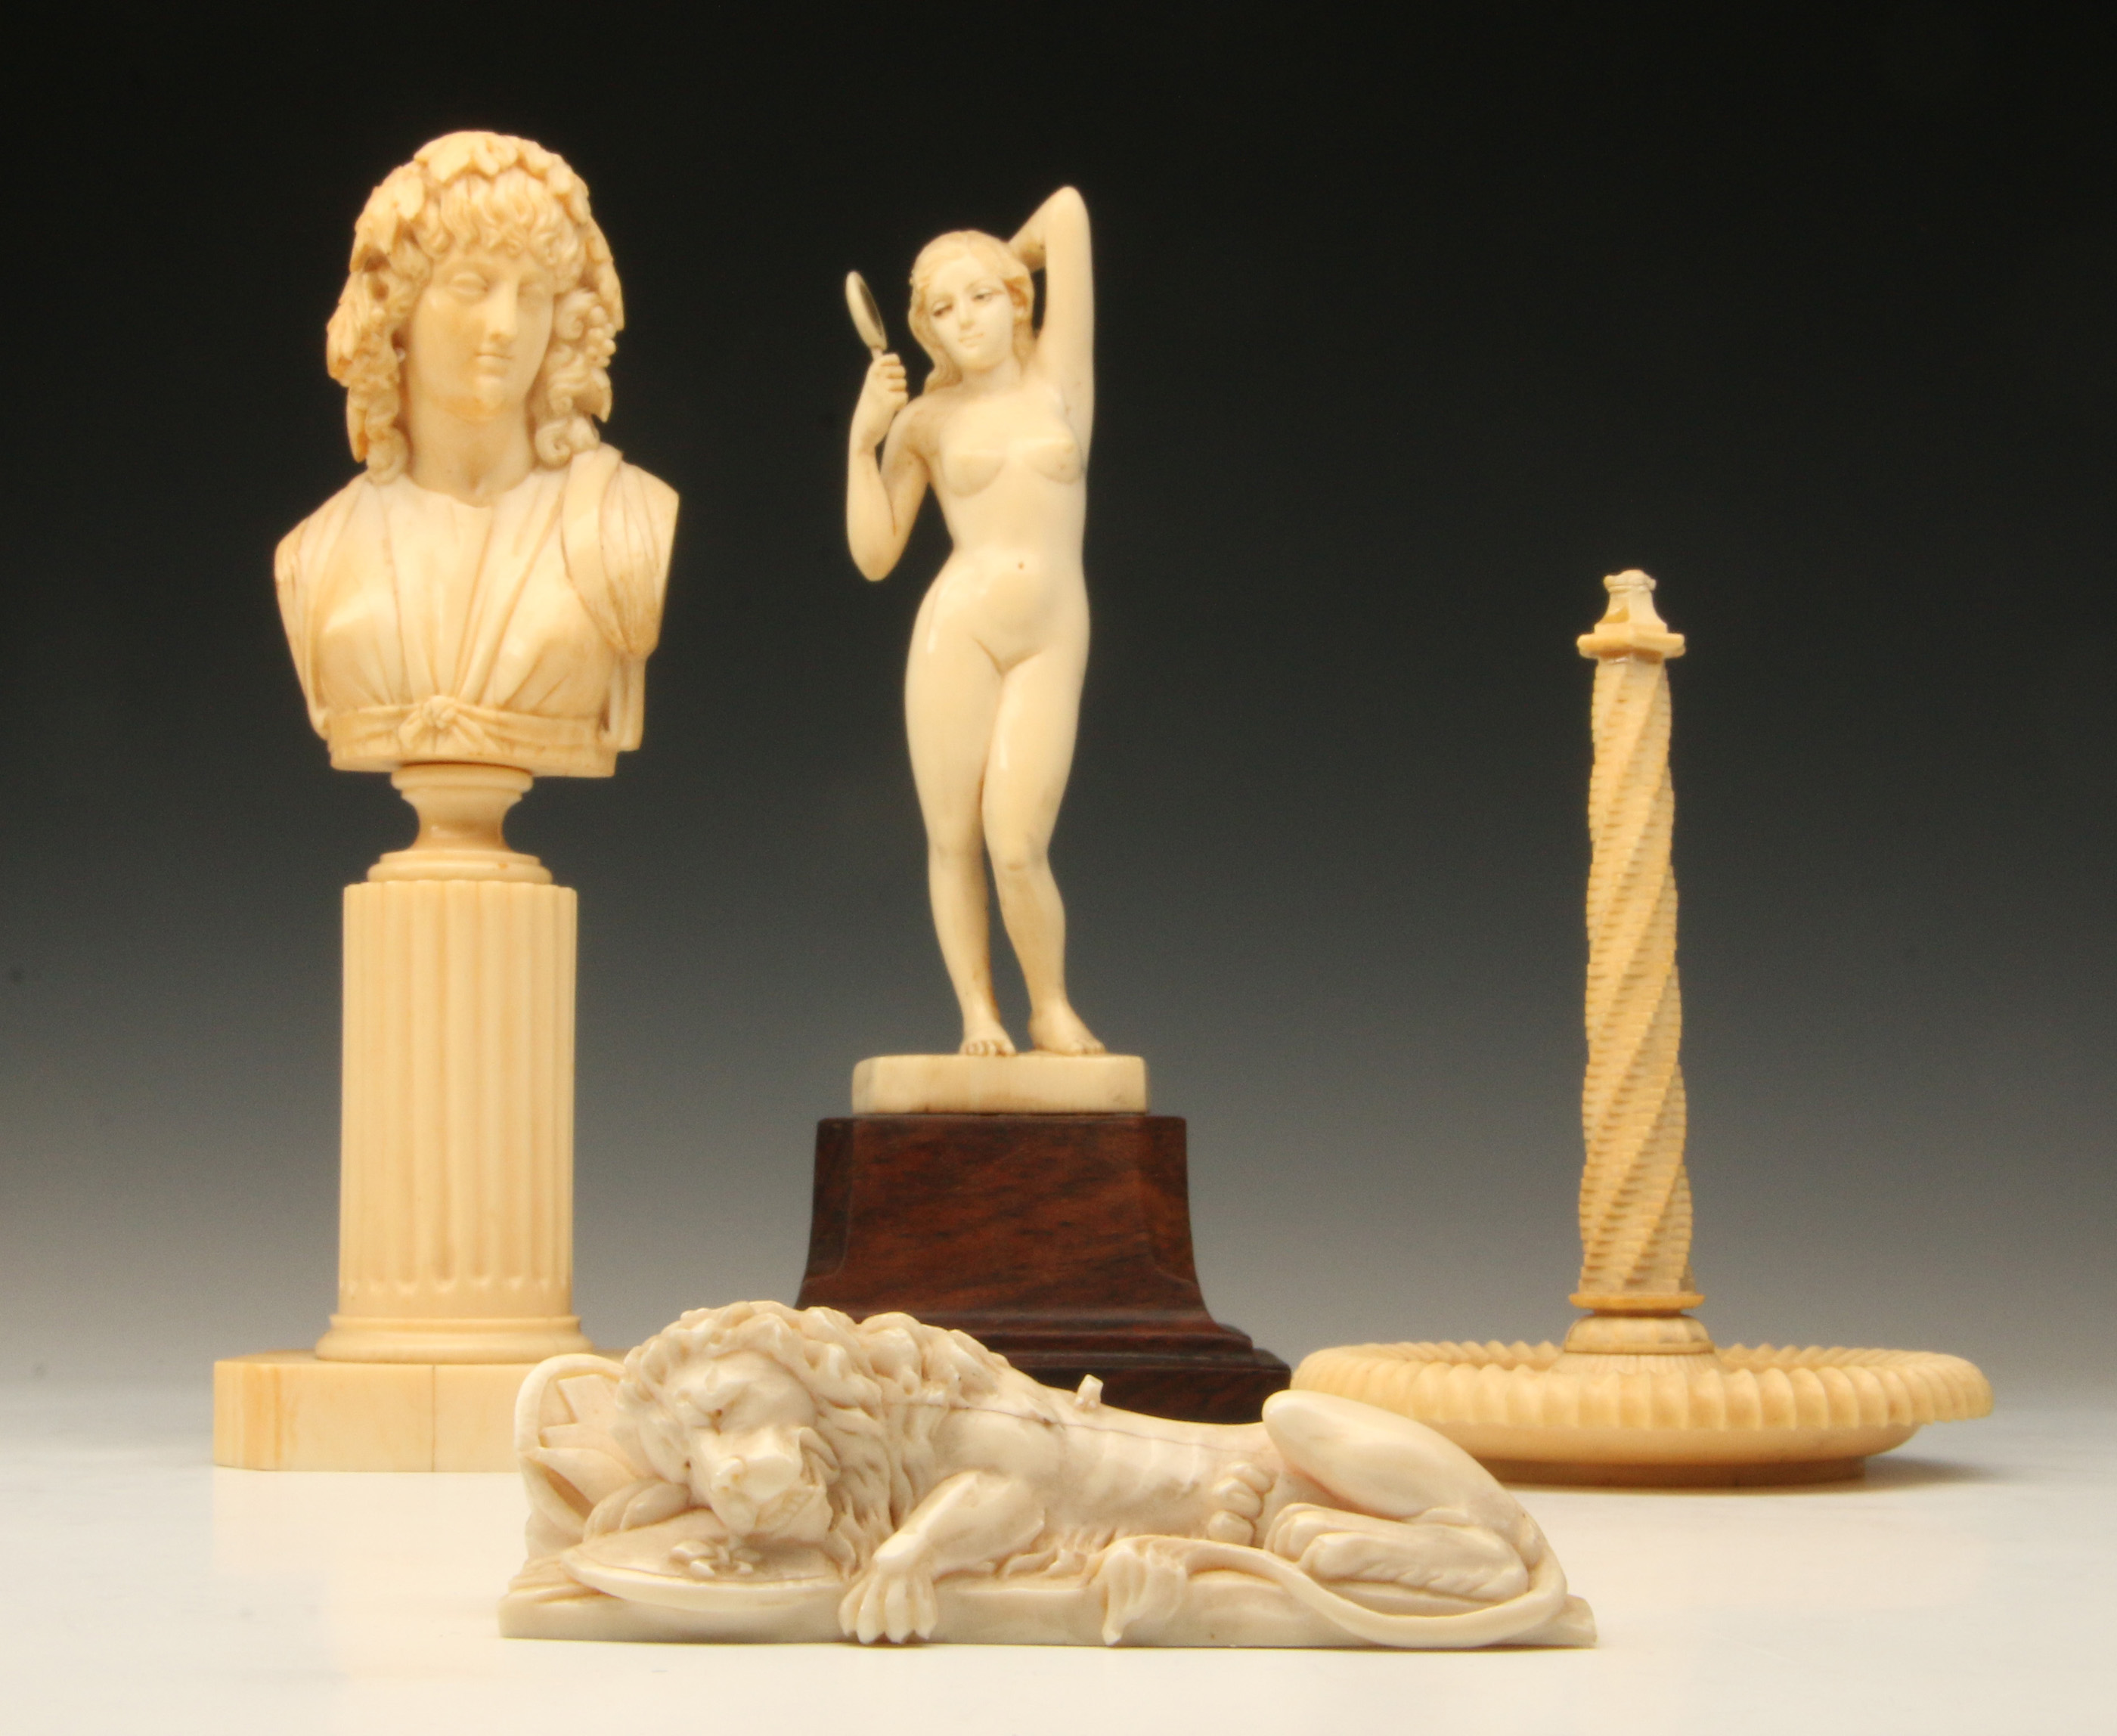 FOUR 19TH C. EUROPEAN CARVED IVORY ART OBJECTS